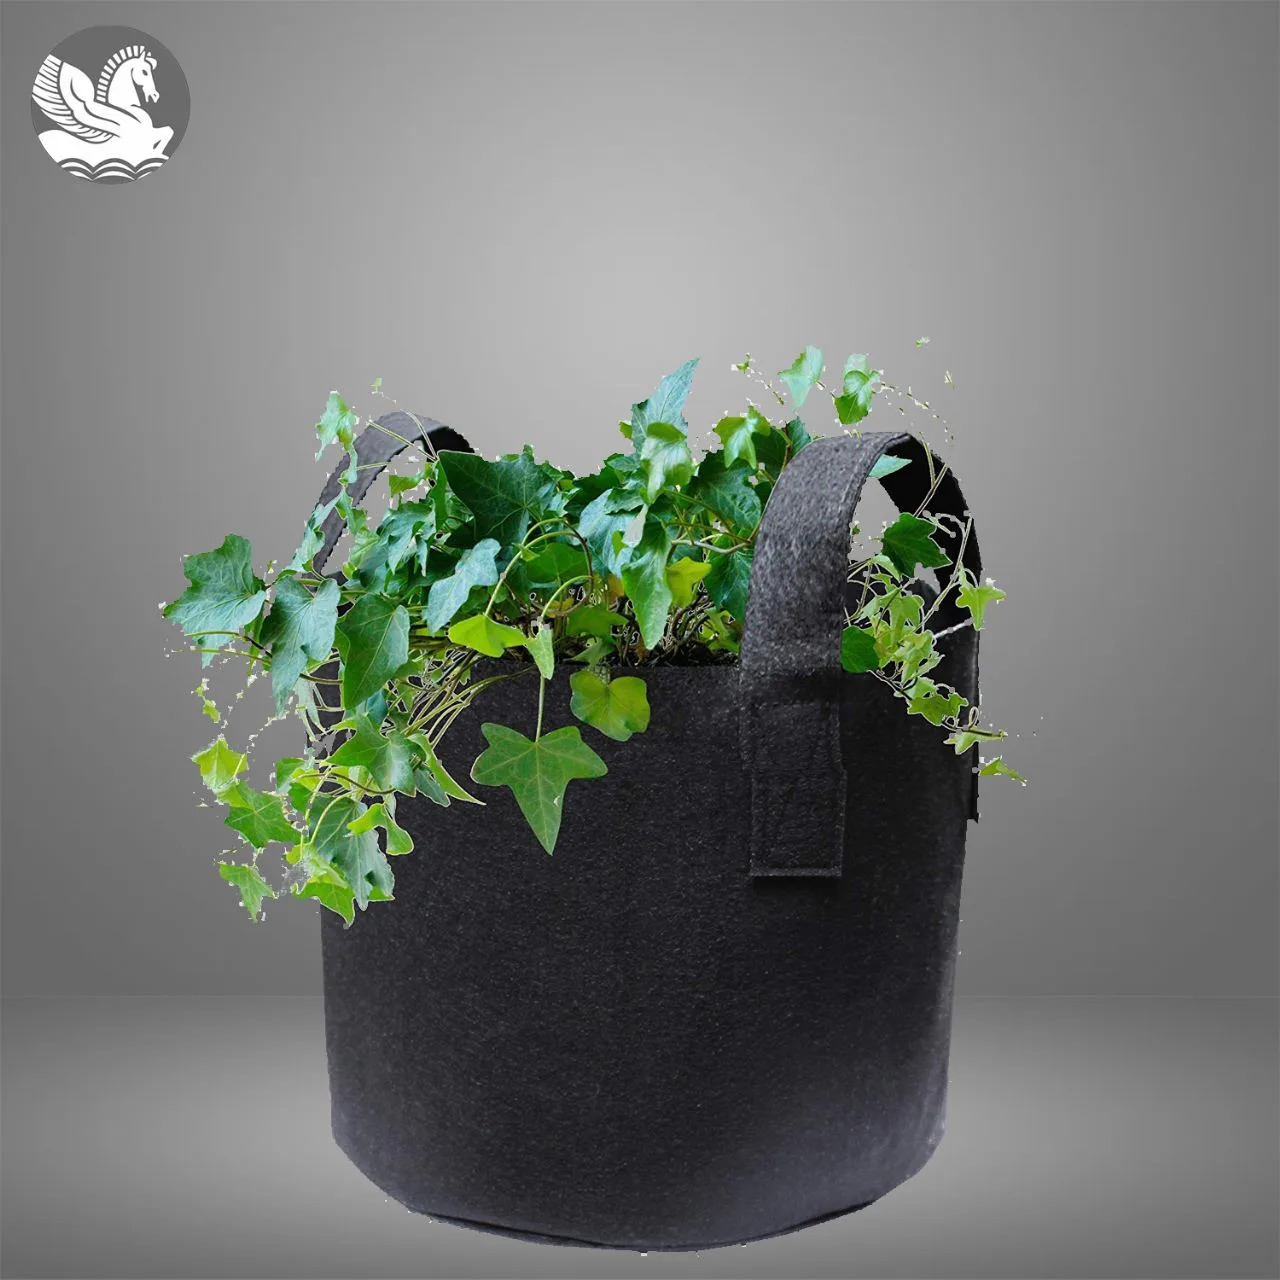  Discover the Versatility of Grow Bags